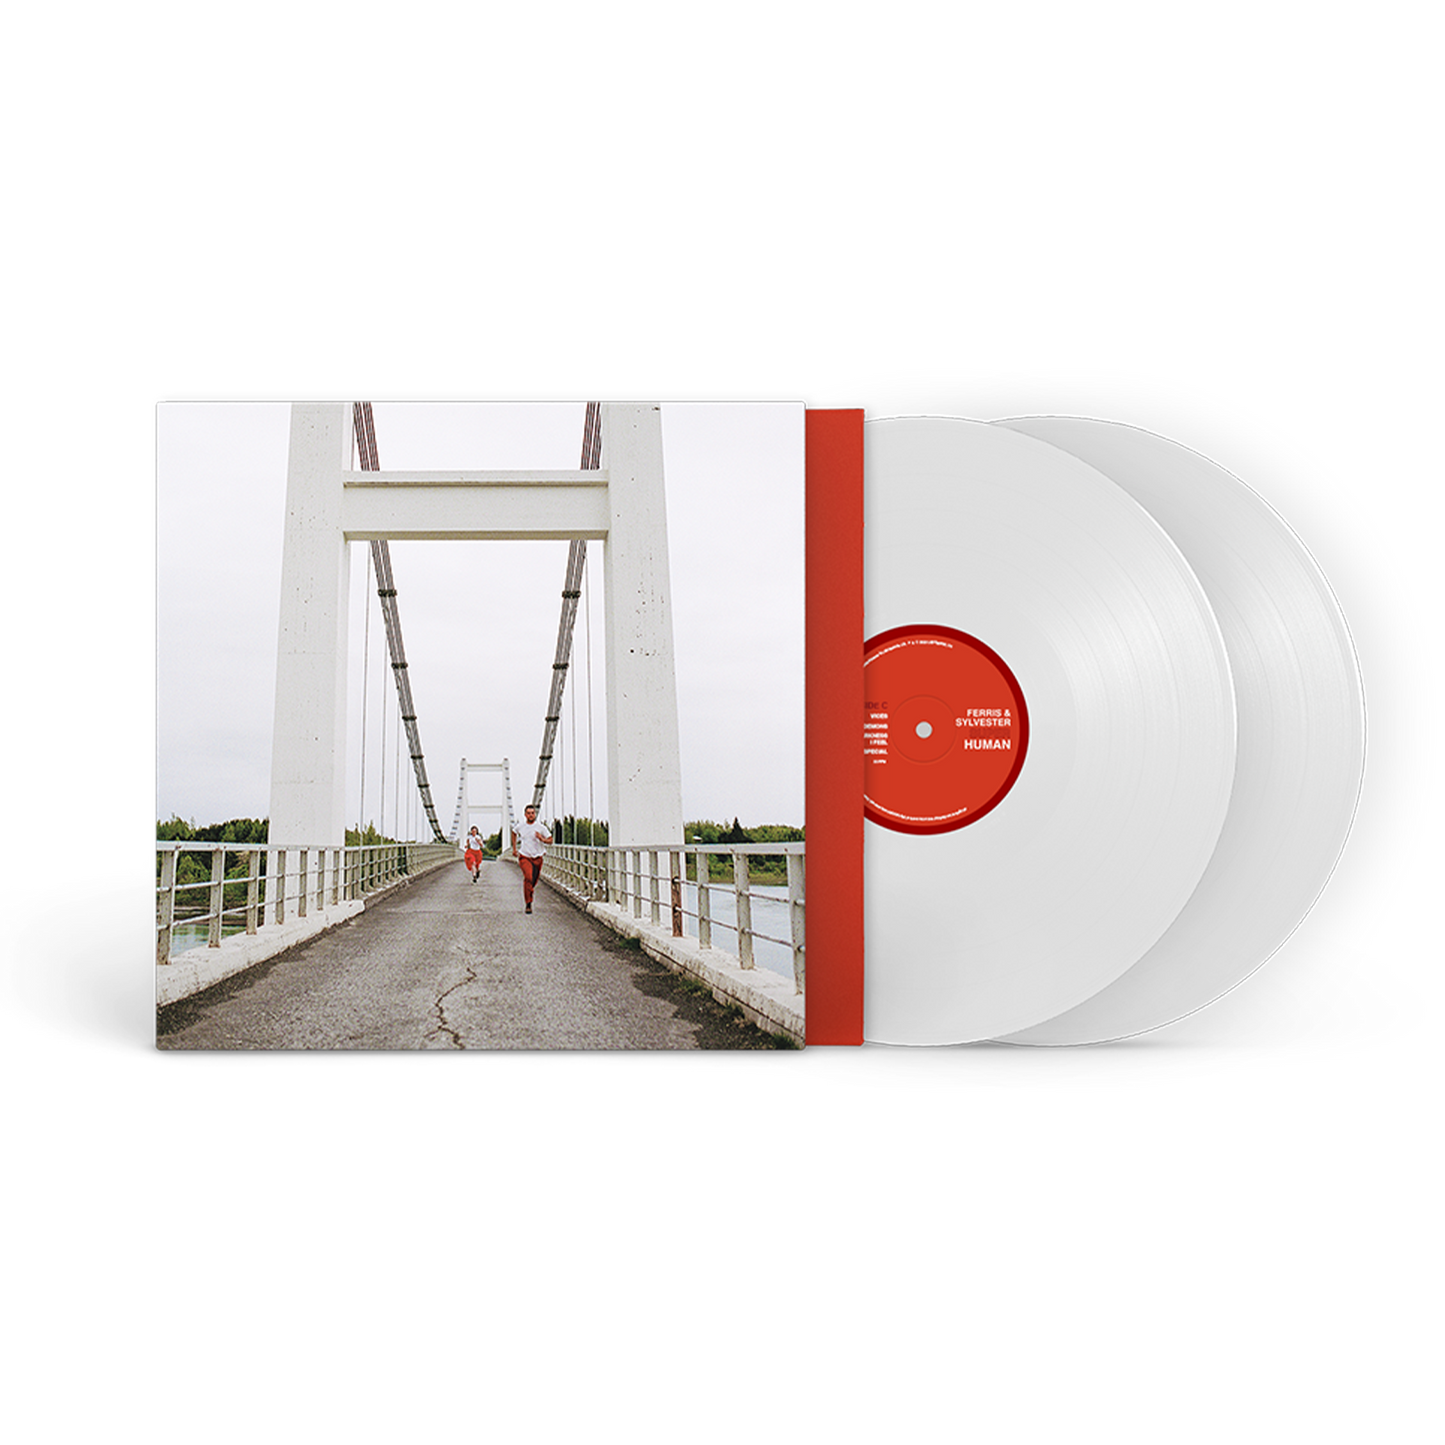 SIGNED LIMITED EDITION WHITE VINYL